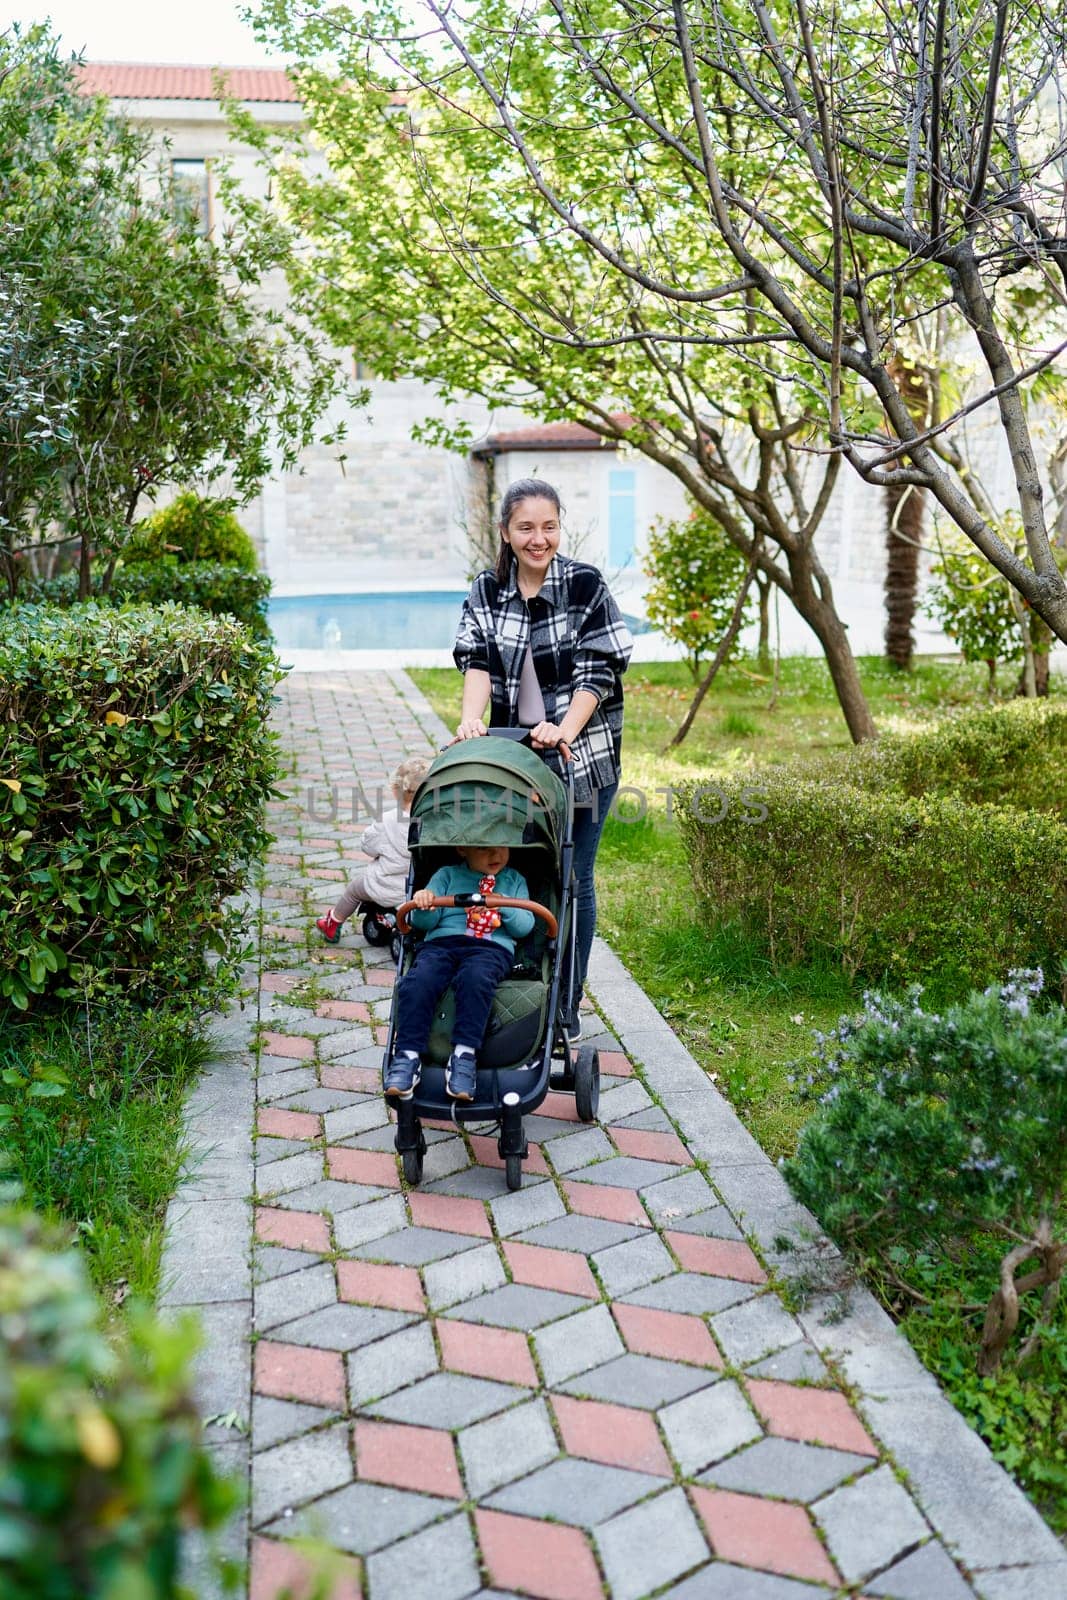 Smiling mother pushing little girl in stroller along path in garden. High quality photo